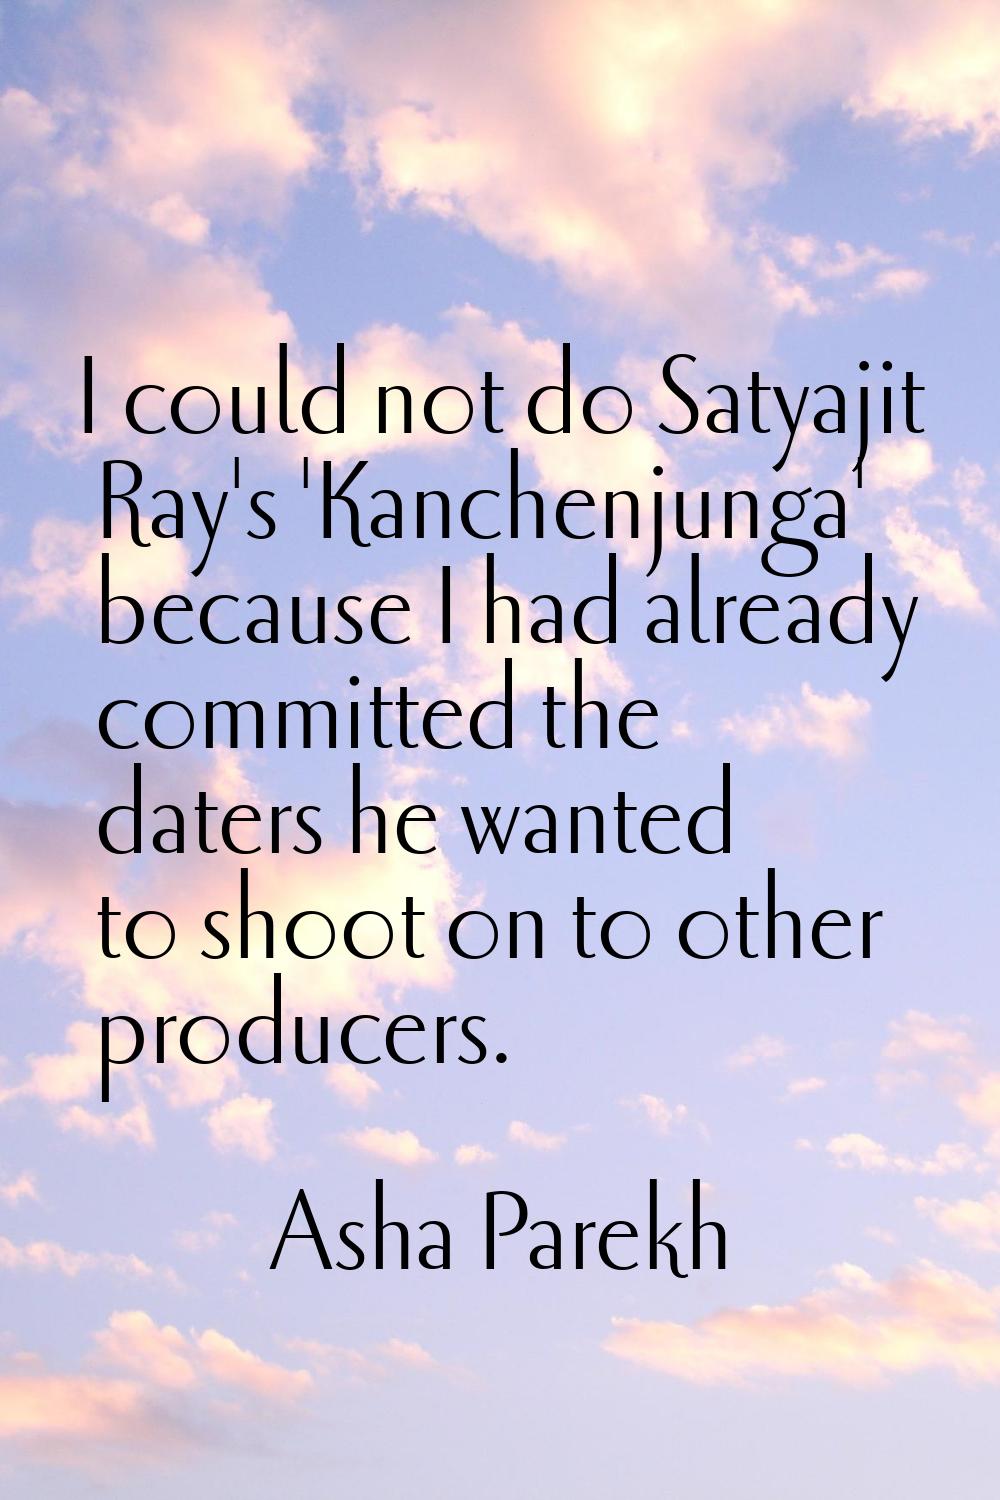 I could not do Satyajit Ray's 'Kanchenjunga' because I had already committed the daters he wanted t